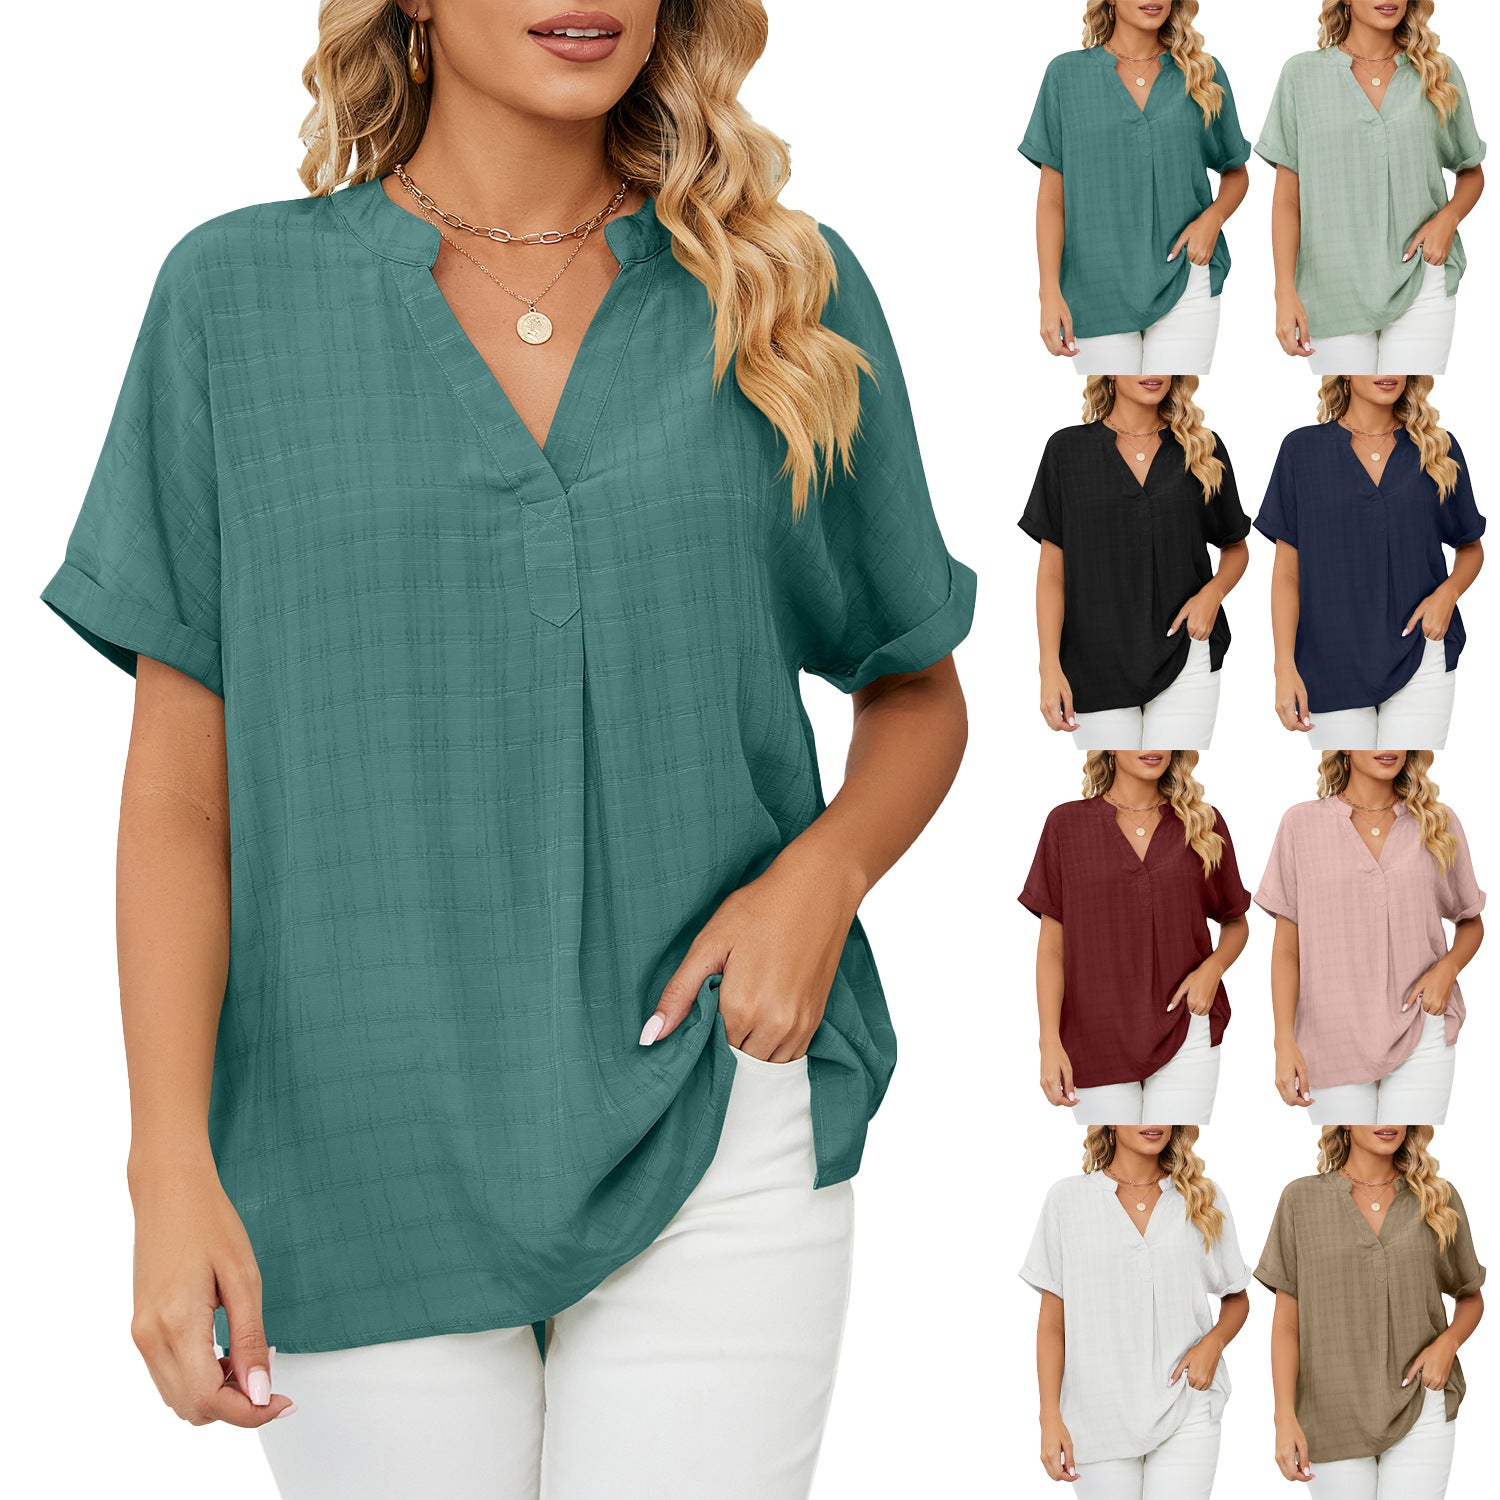 Women's Thin V-neck Leisure Pullover Solid Color Blouses